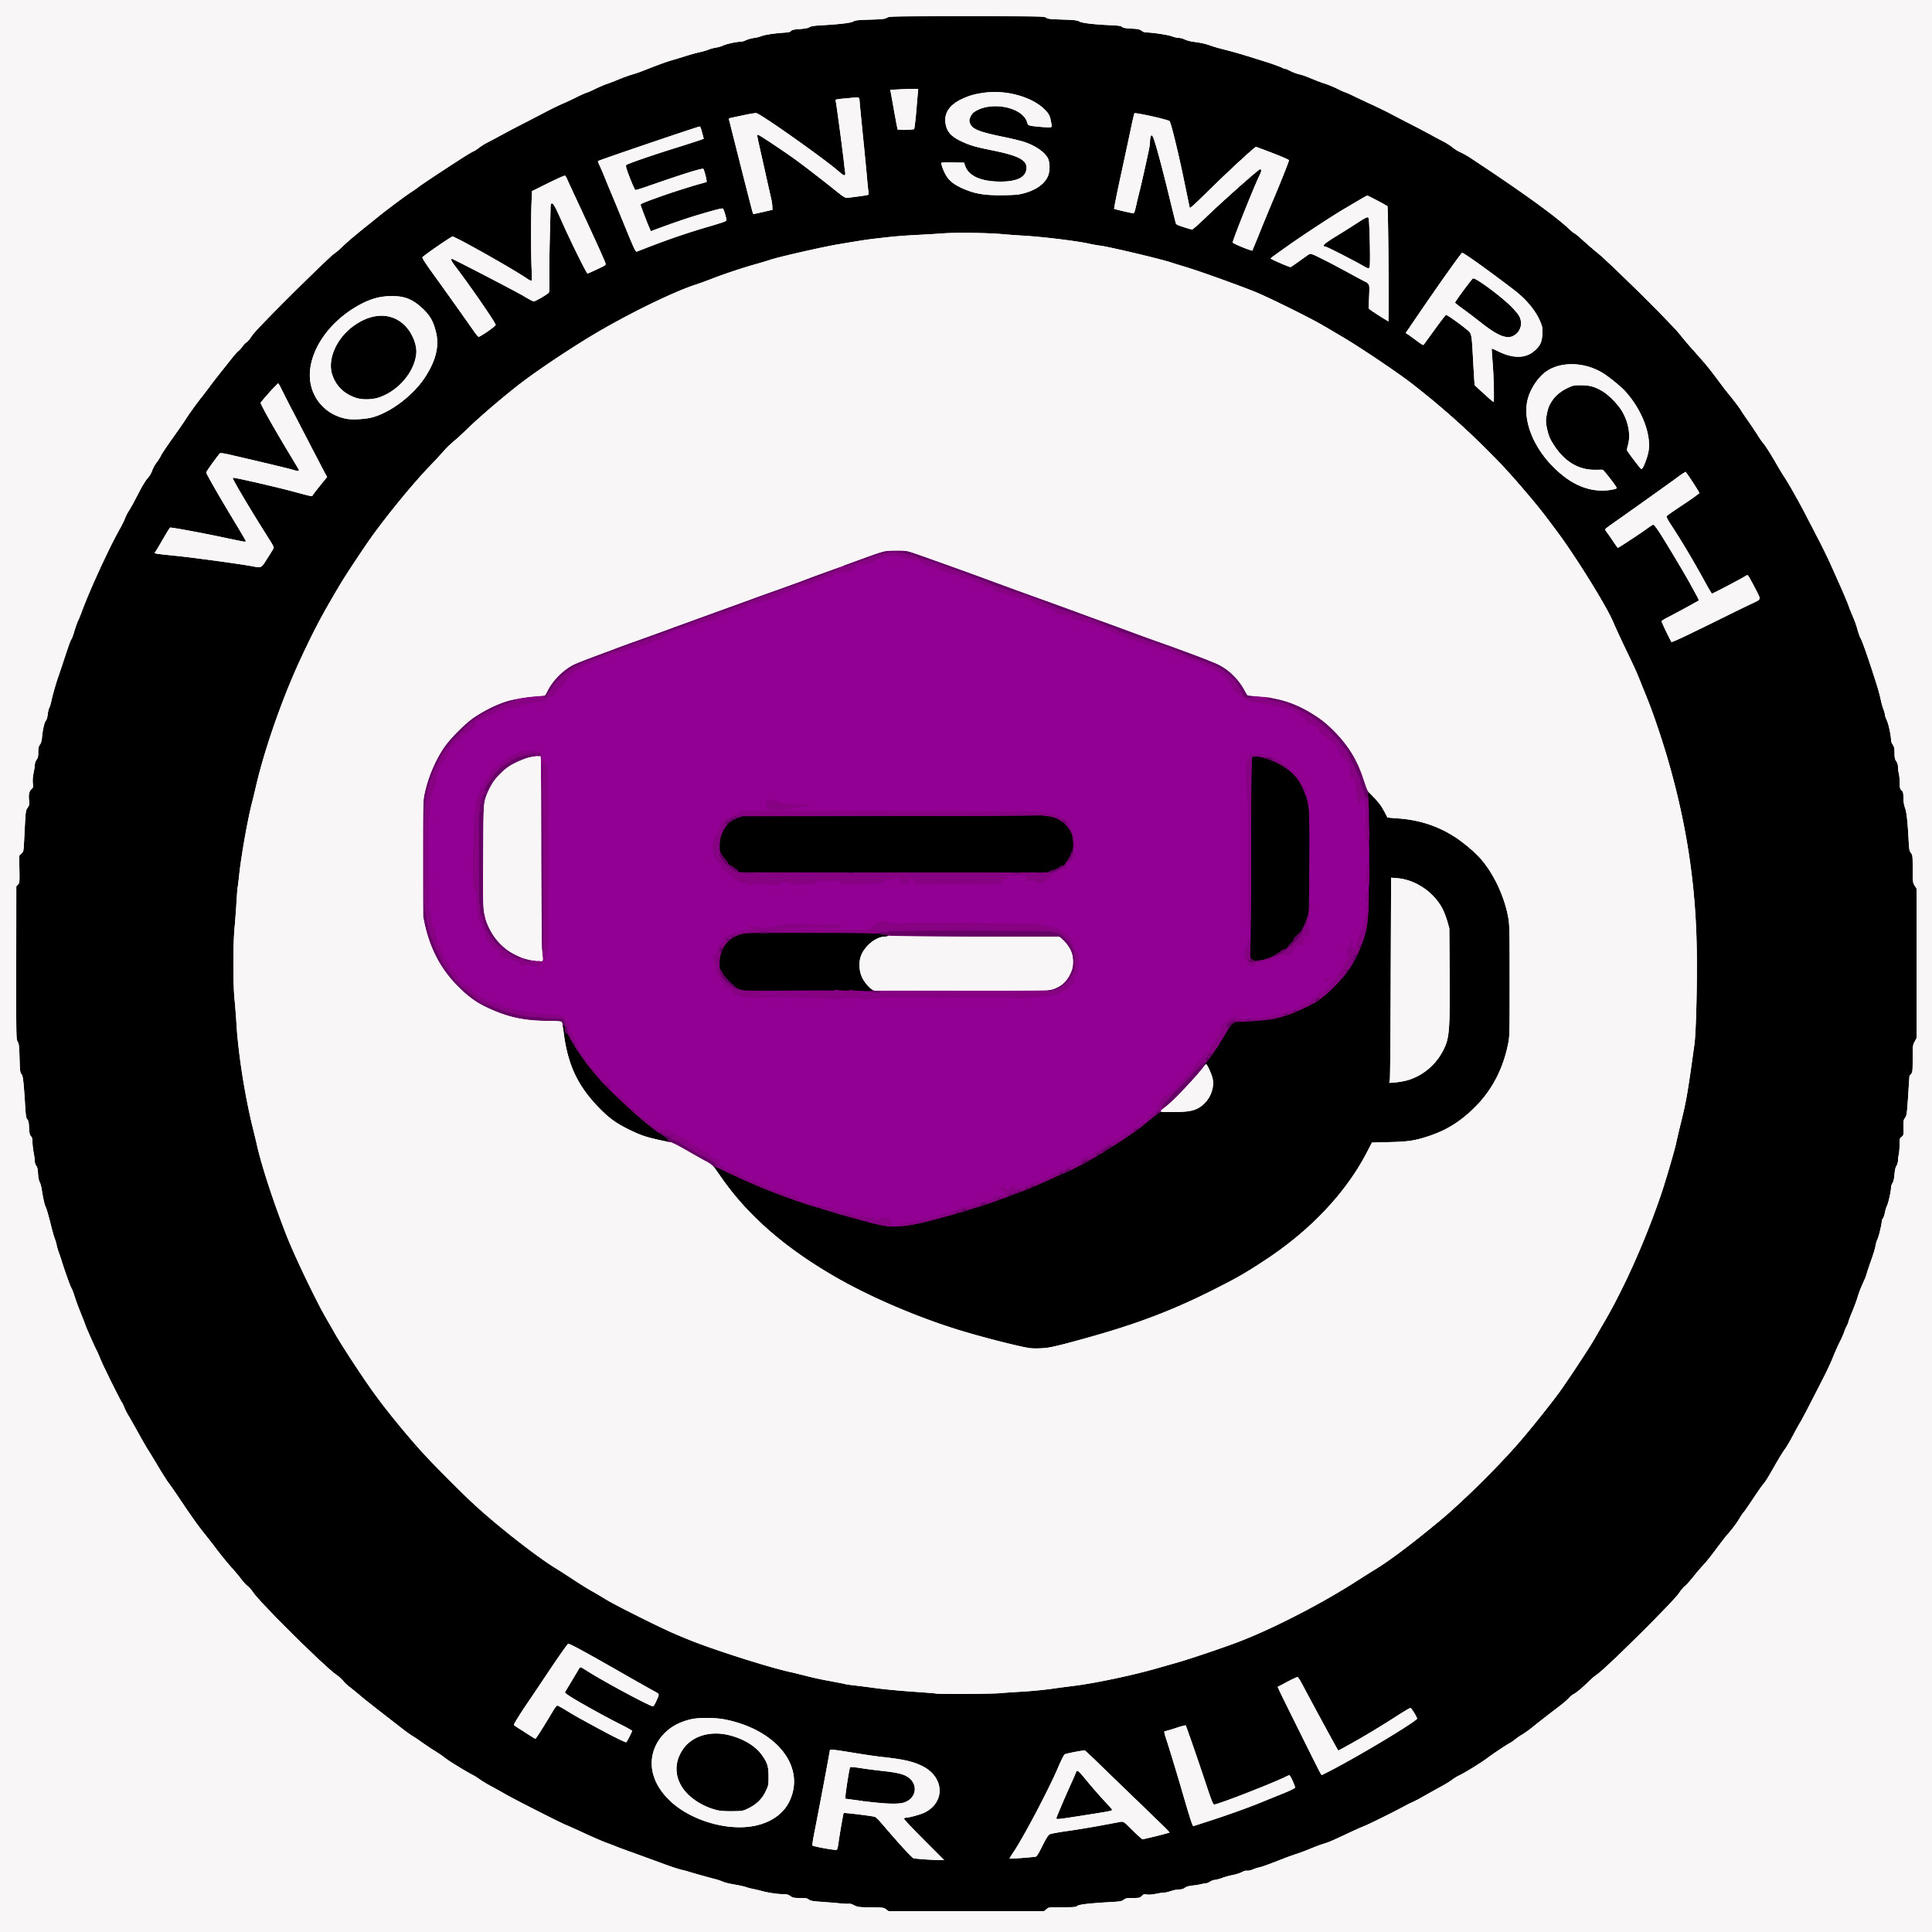 Women's march for all